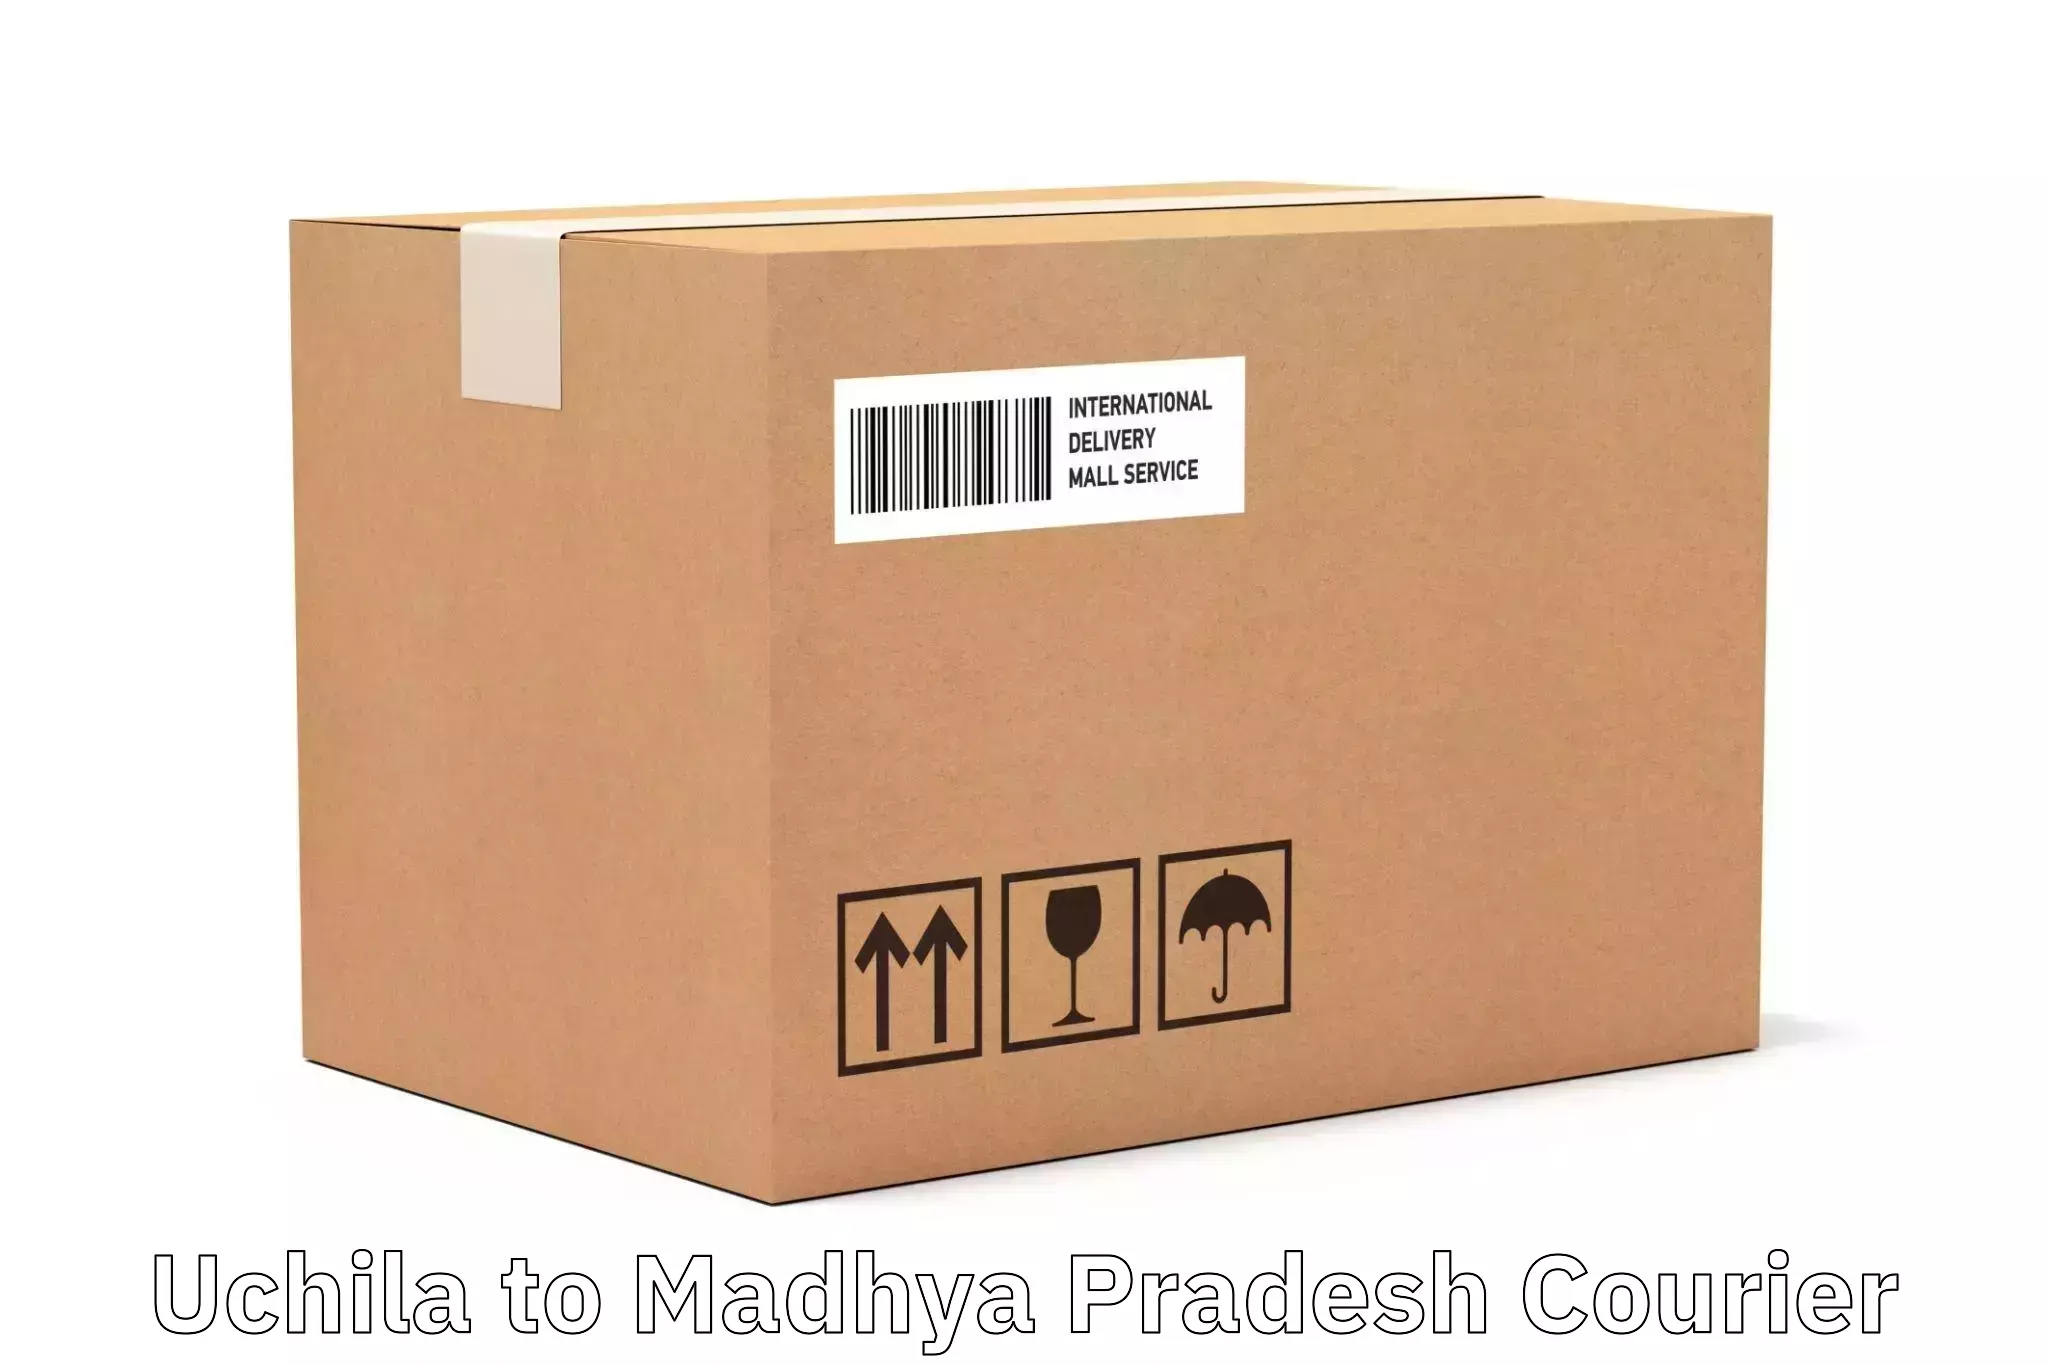 Customized delivery options in Uchila to Badnagar